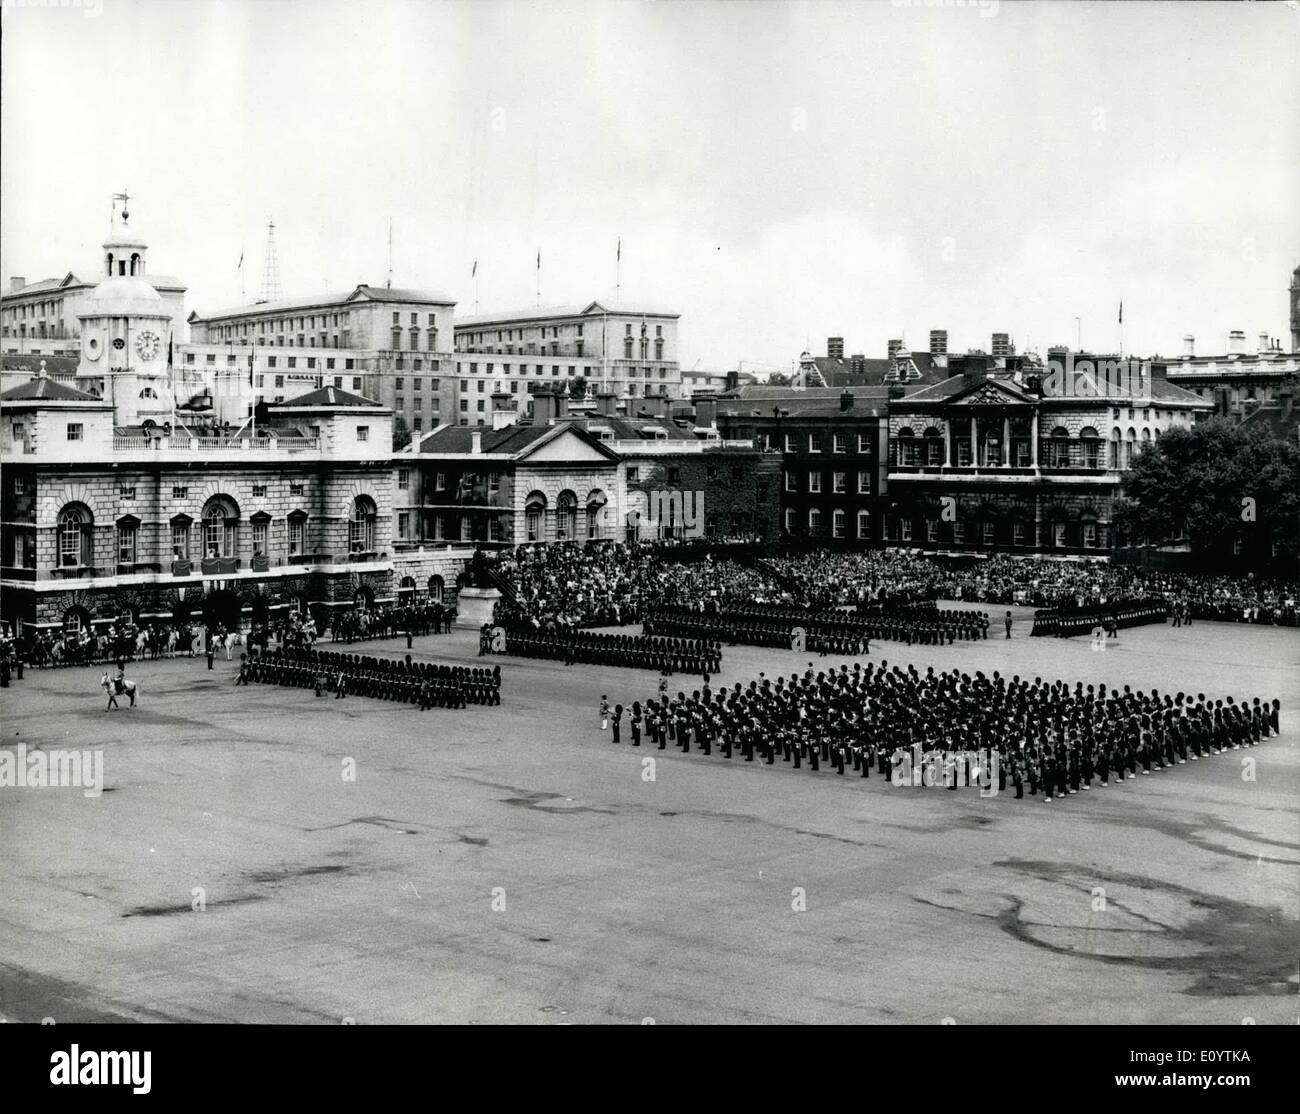 Jun. 06, 1971 - THE QUEEN TAKES THE SALUTE AT THE TROOPING THE COLOUR CEREMONY To mark her official birthday the QUEEN today took the salute at the Trooping the Colour ceremony, trooped by the 2nd Battalion Grenadier Guards on Horse Guards Parade. PHOTO SHOWS: A general view of the ceremony on Horse Guards Parade as the QUEEN 9background) takes the salute during the march past of tha Guards, Stock Photo